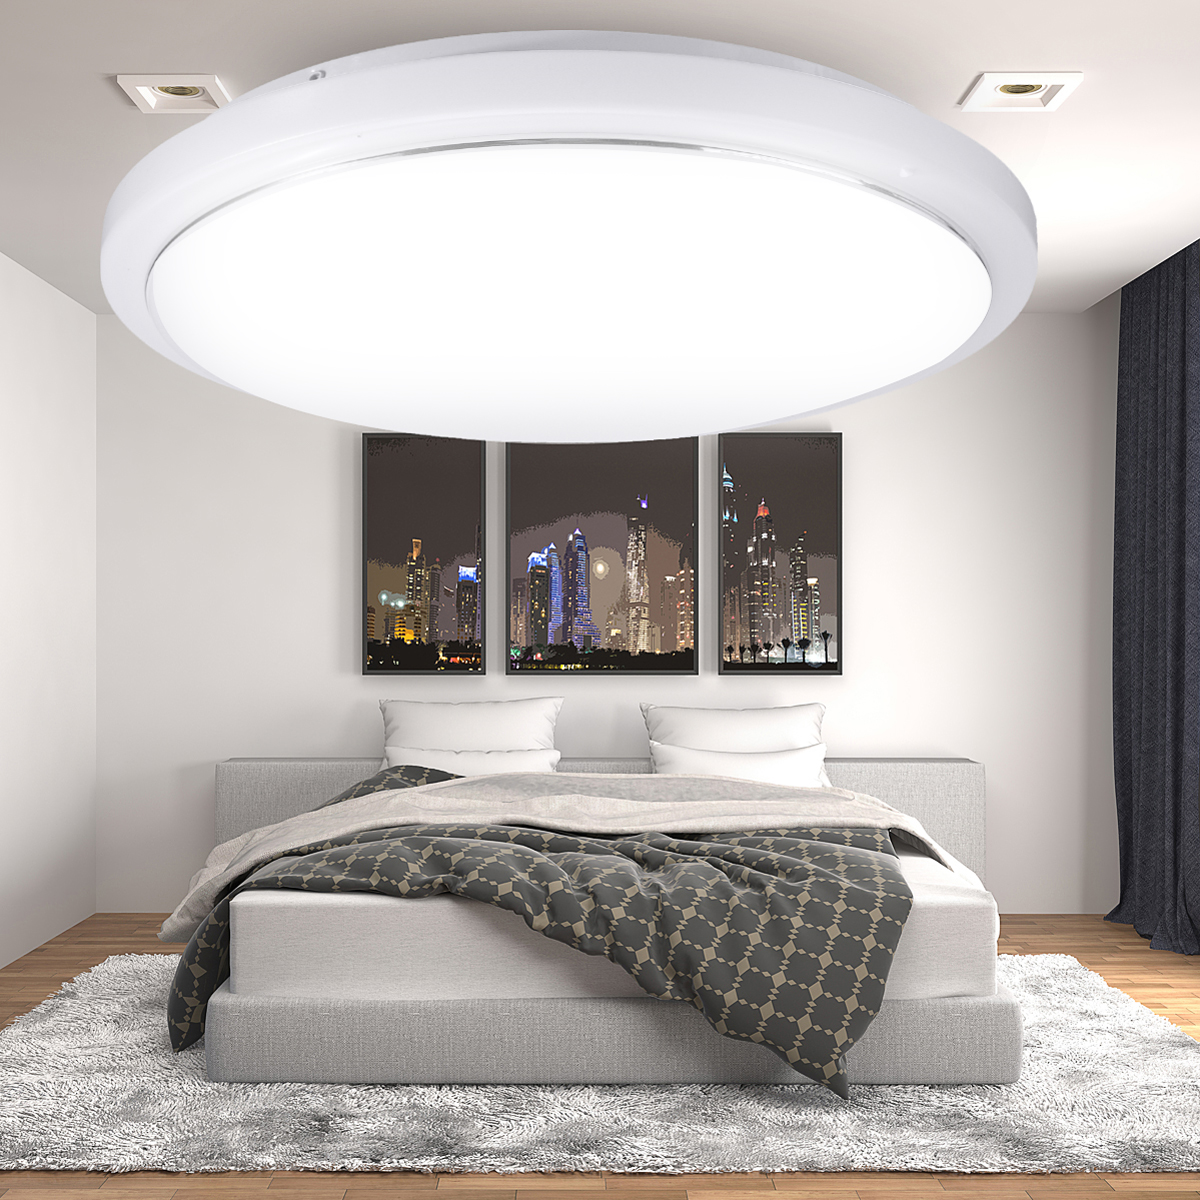 12W Round LED Ceiling Down Light Flush Mount Home Kitchen Bedroom Fixture Lamp 